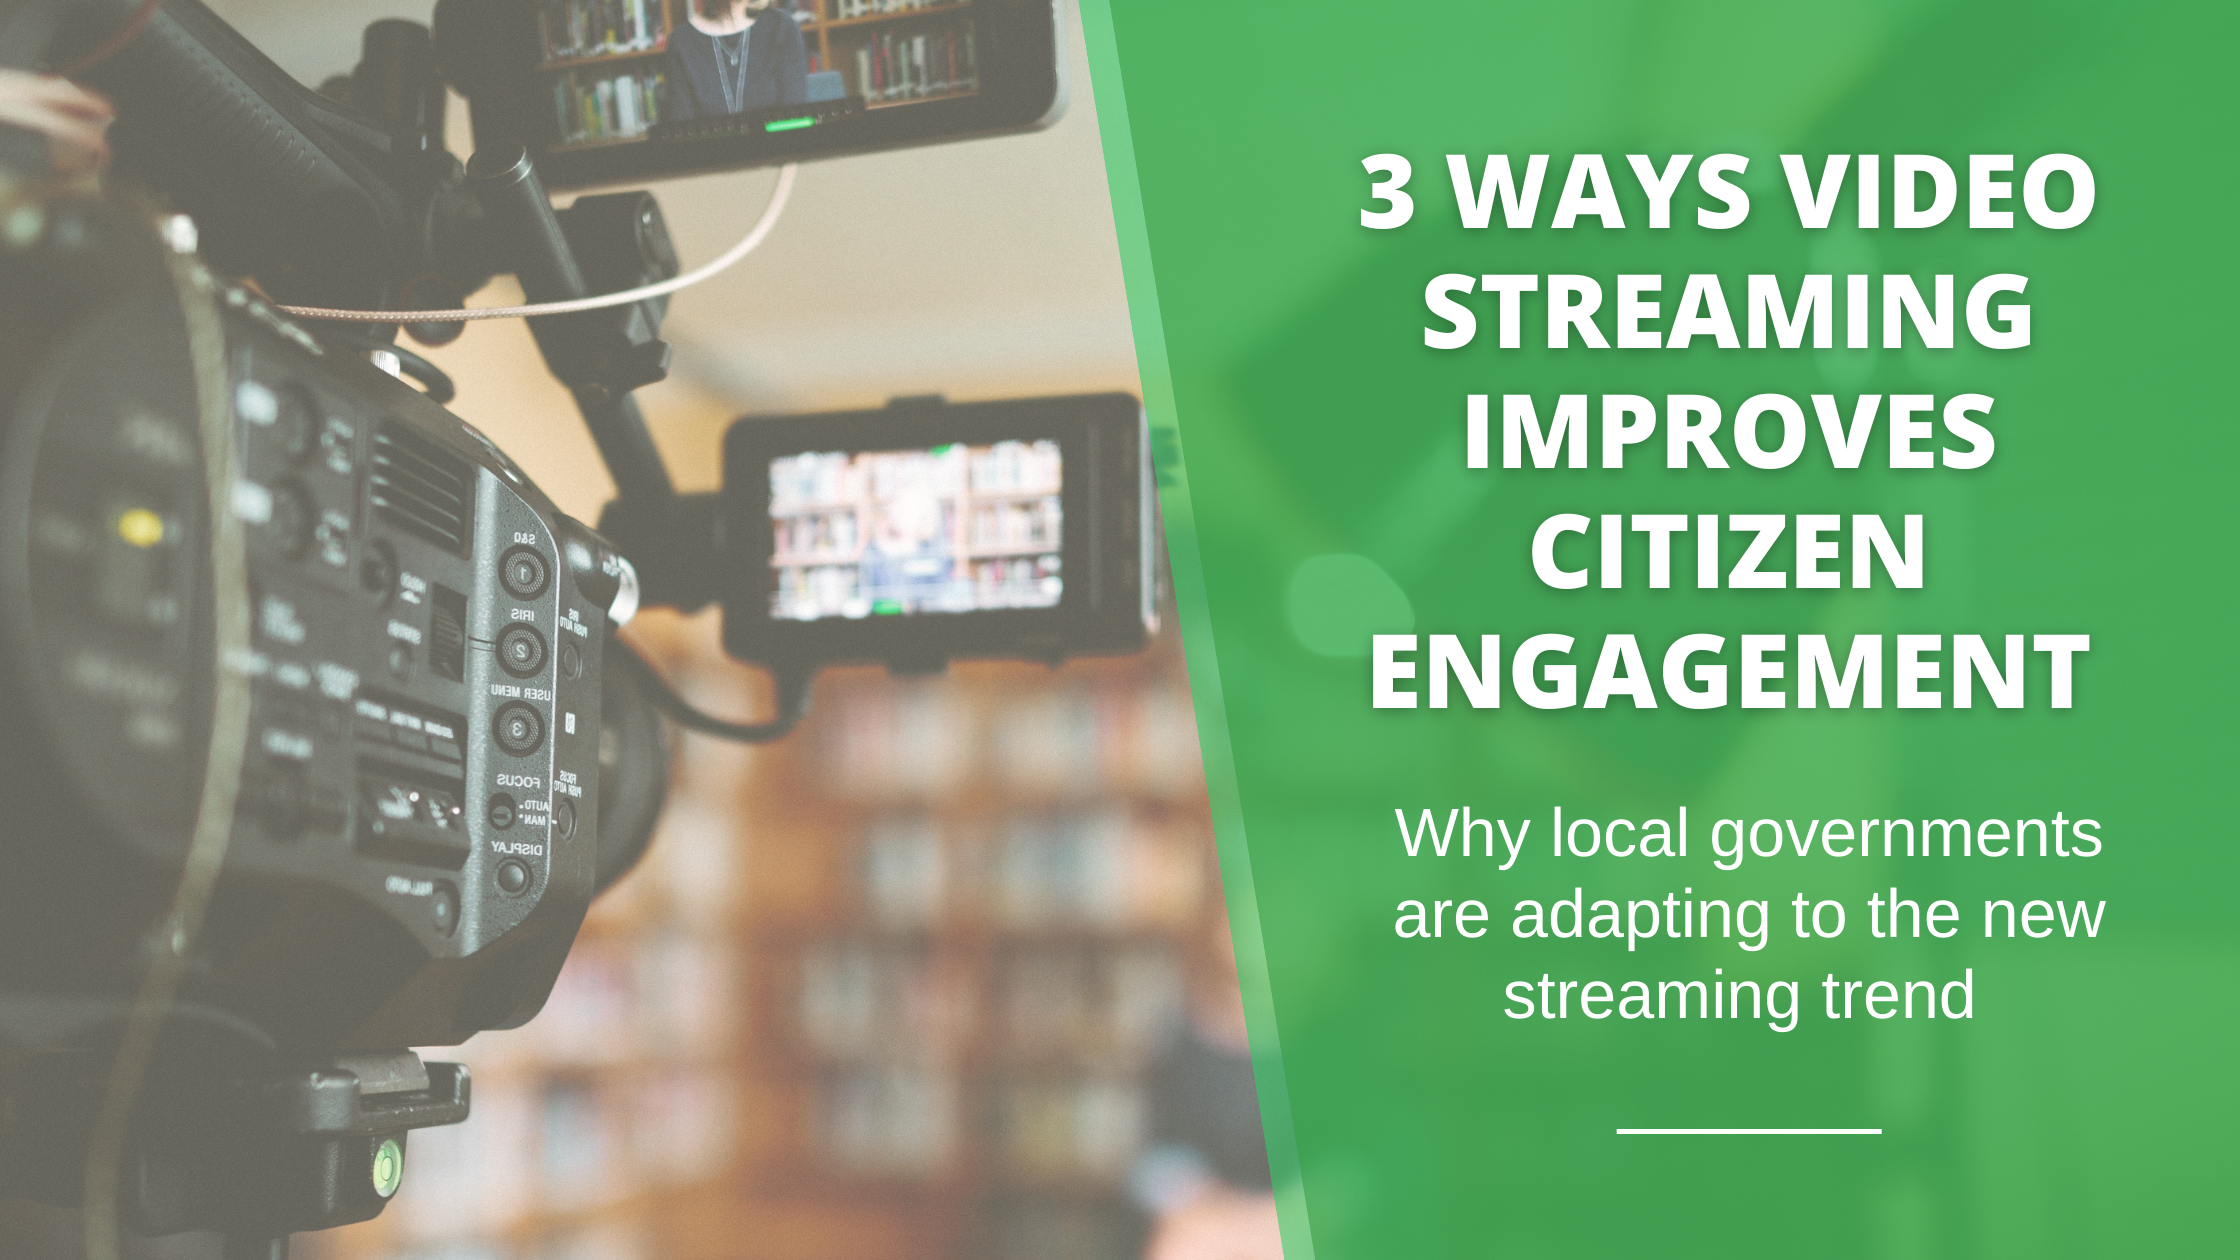 3 Ways Video Streaming Improves Citizen Engagement